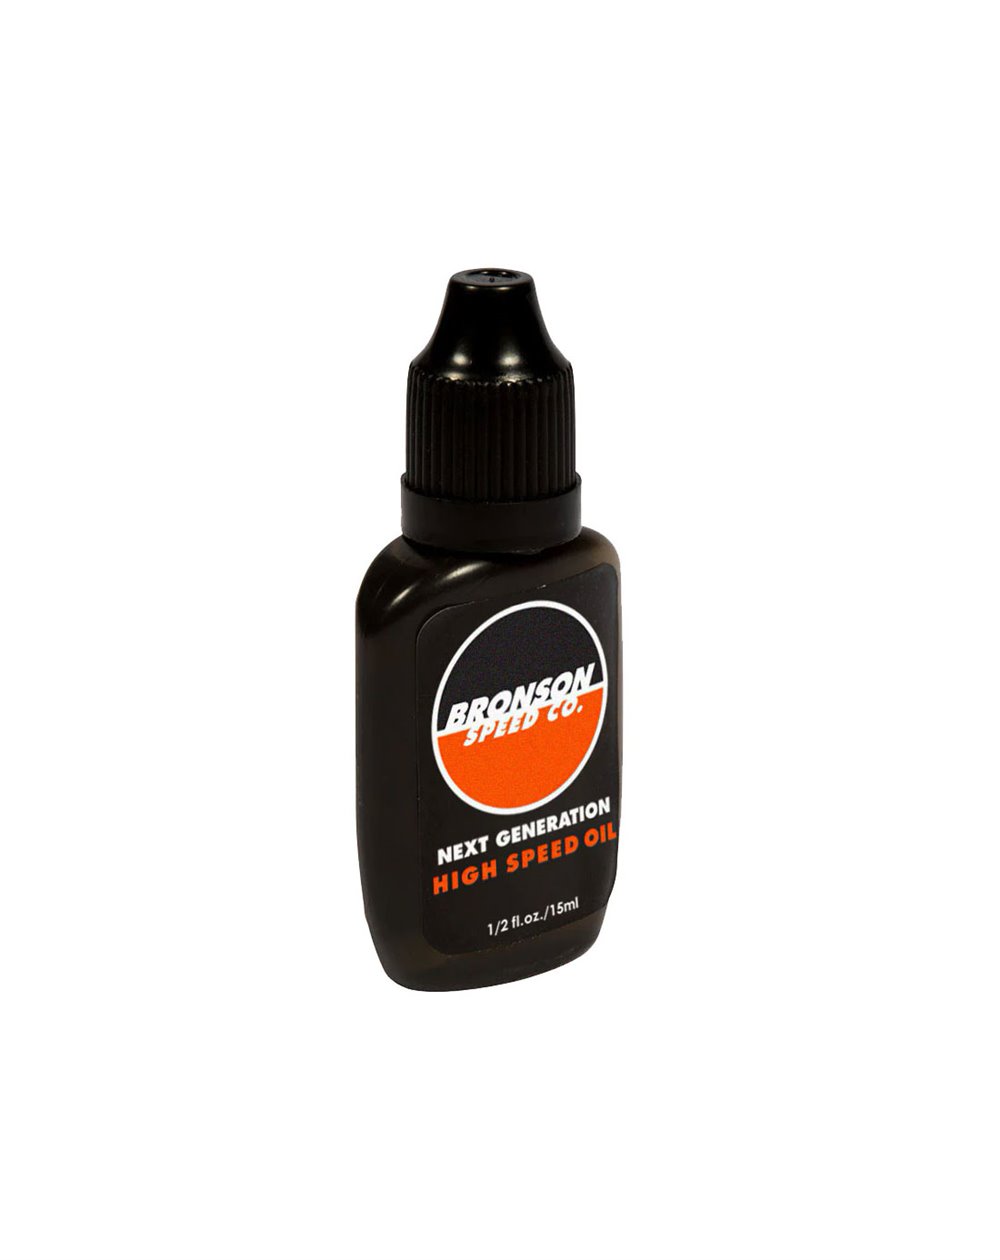 Bronson Speed Co. Lubrifiant pour Roulements Next Generation High Speed Ceramic Oil